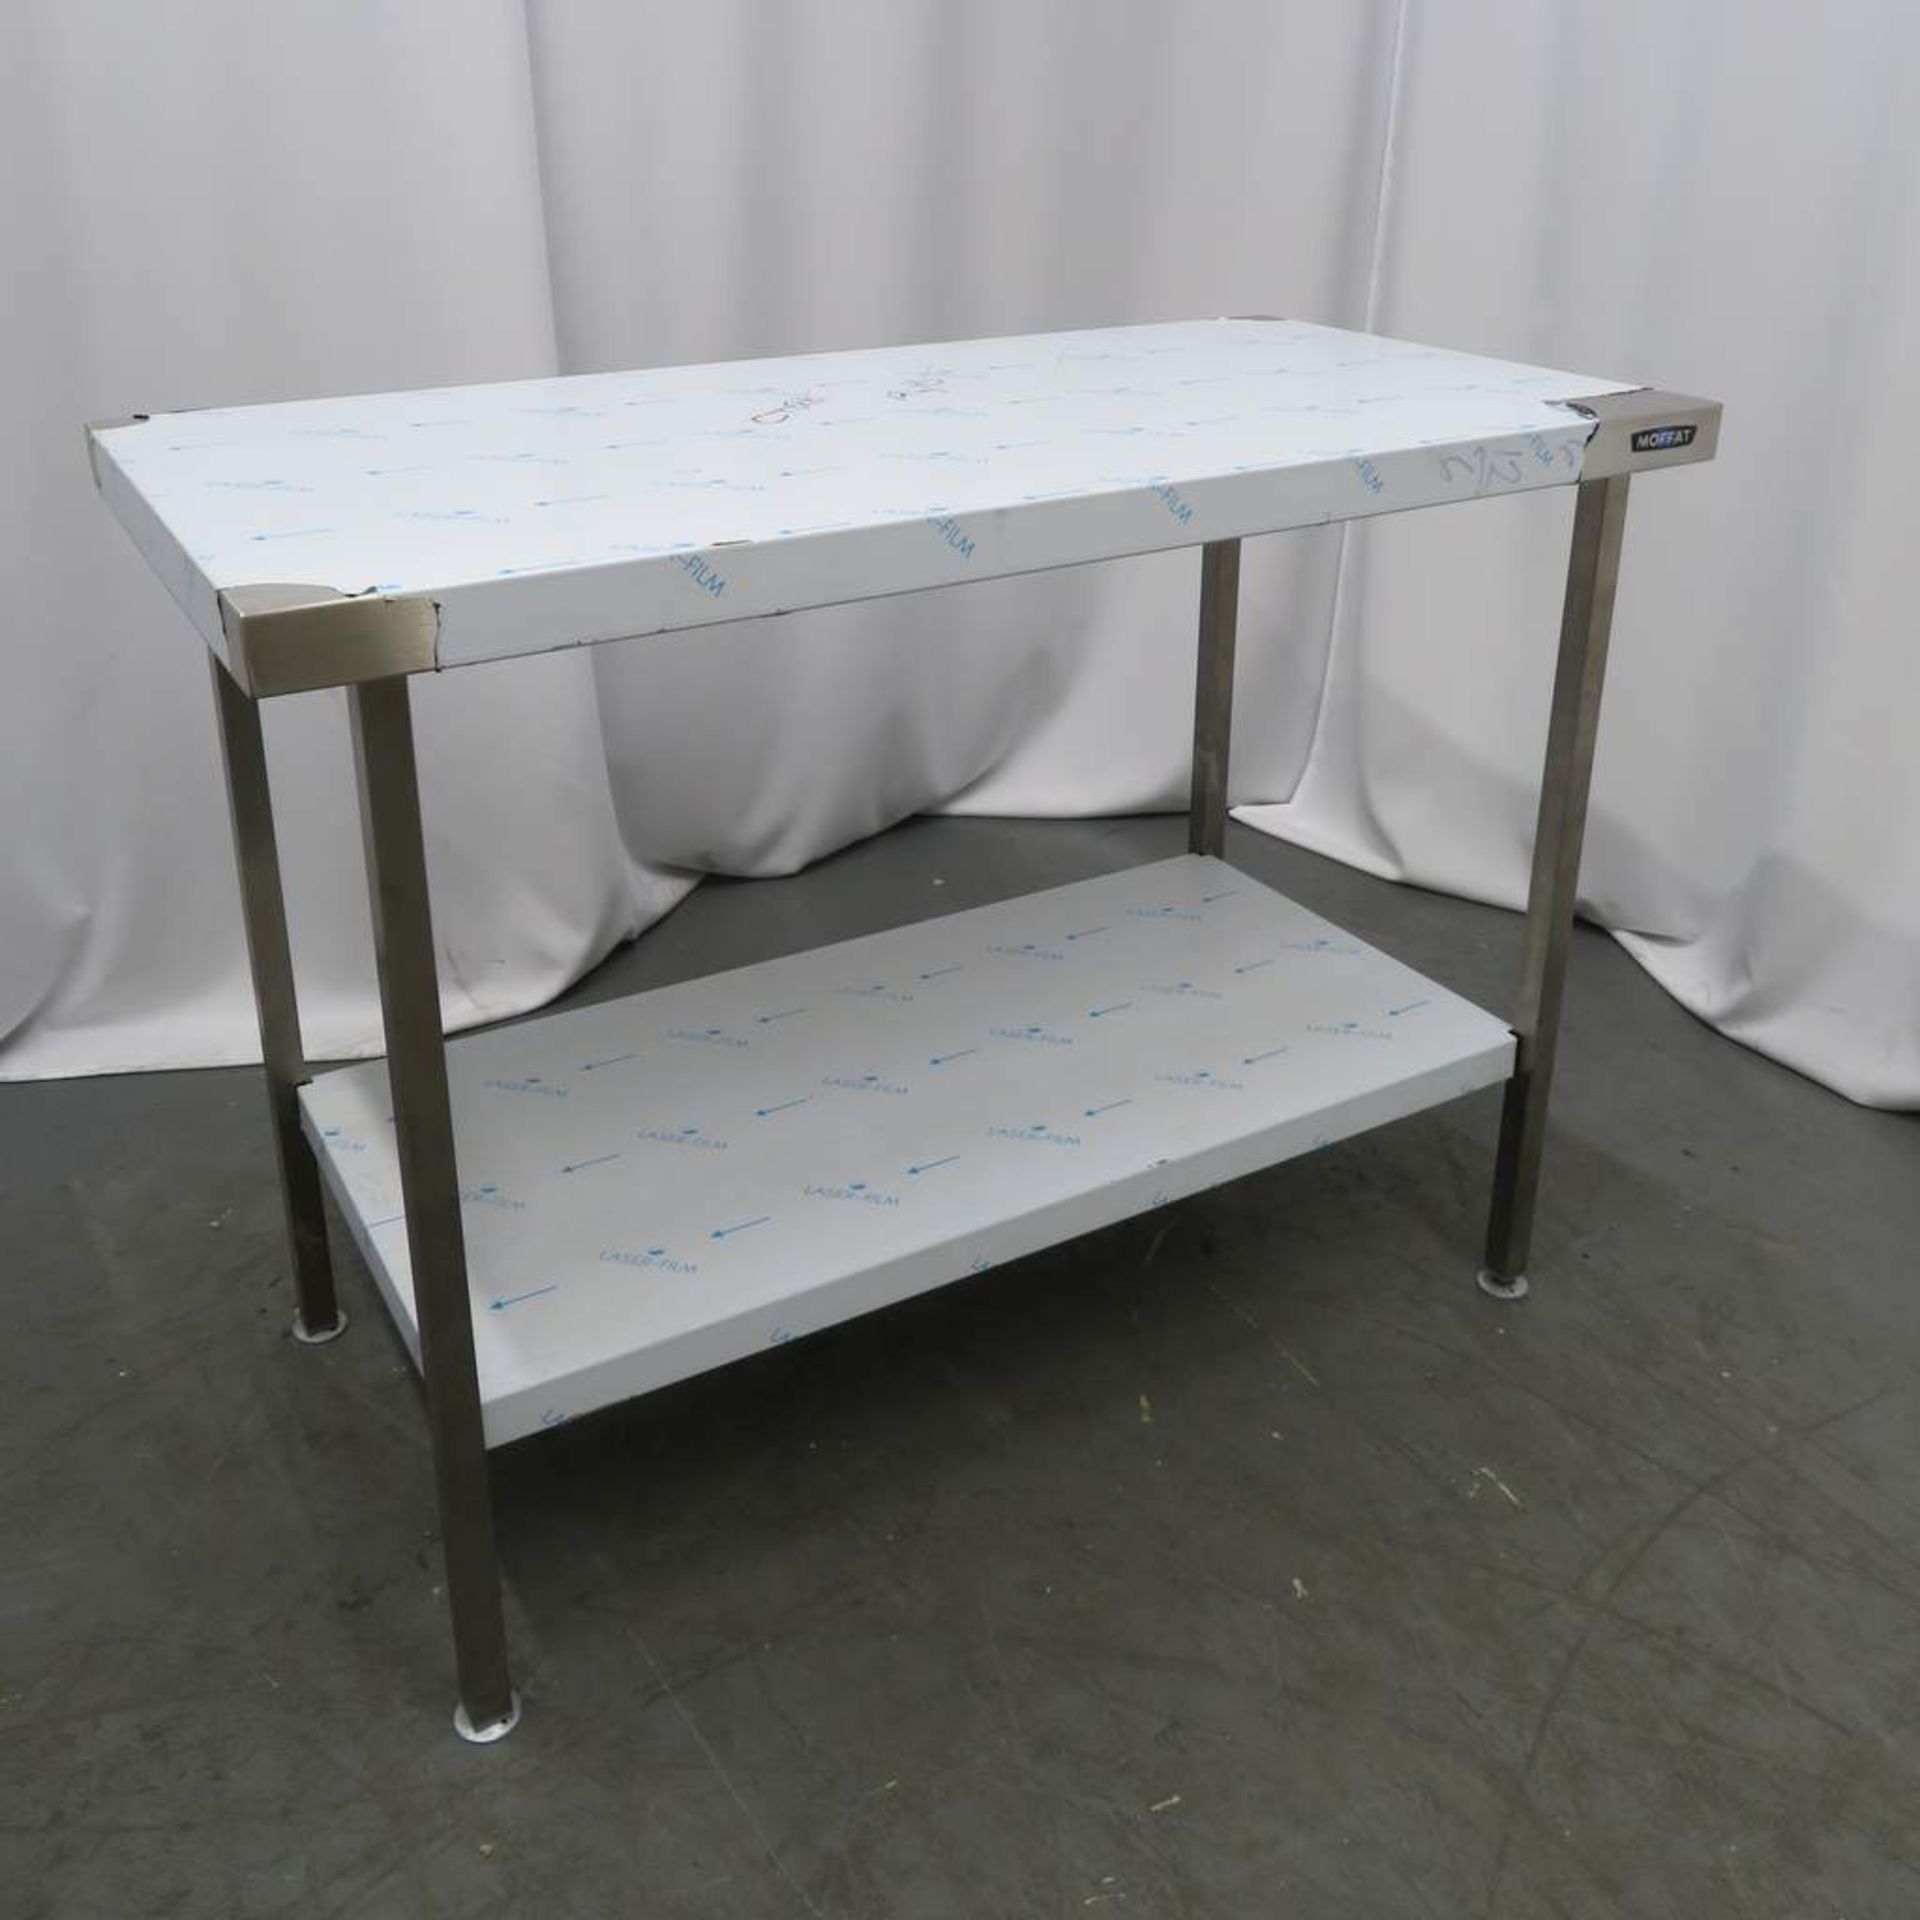 MOFFAT STAINLESS STEEL KITCHEN PREPERATION TABLE WITH UNDER SHELF